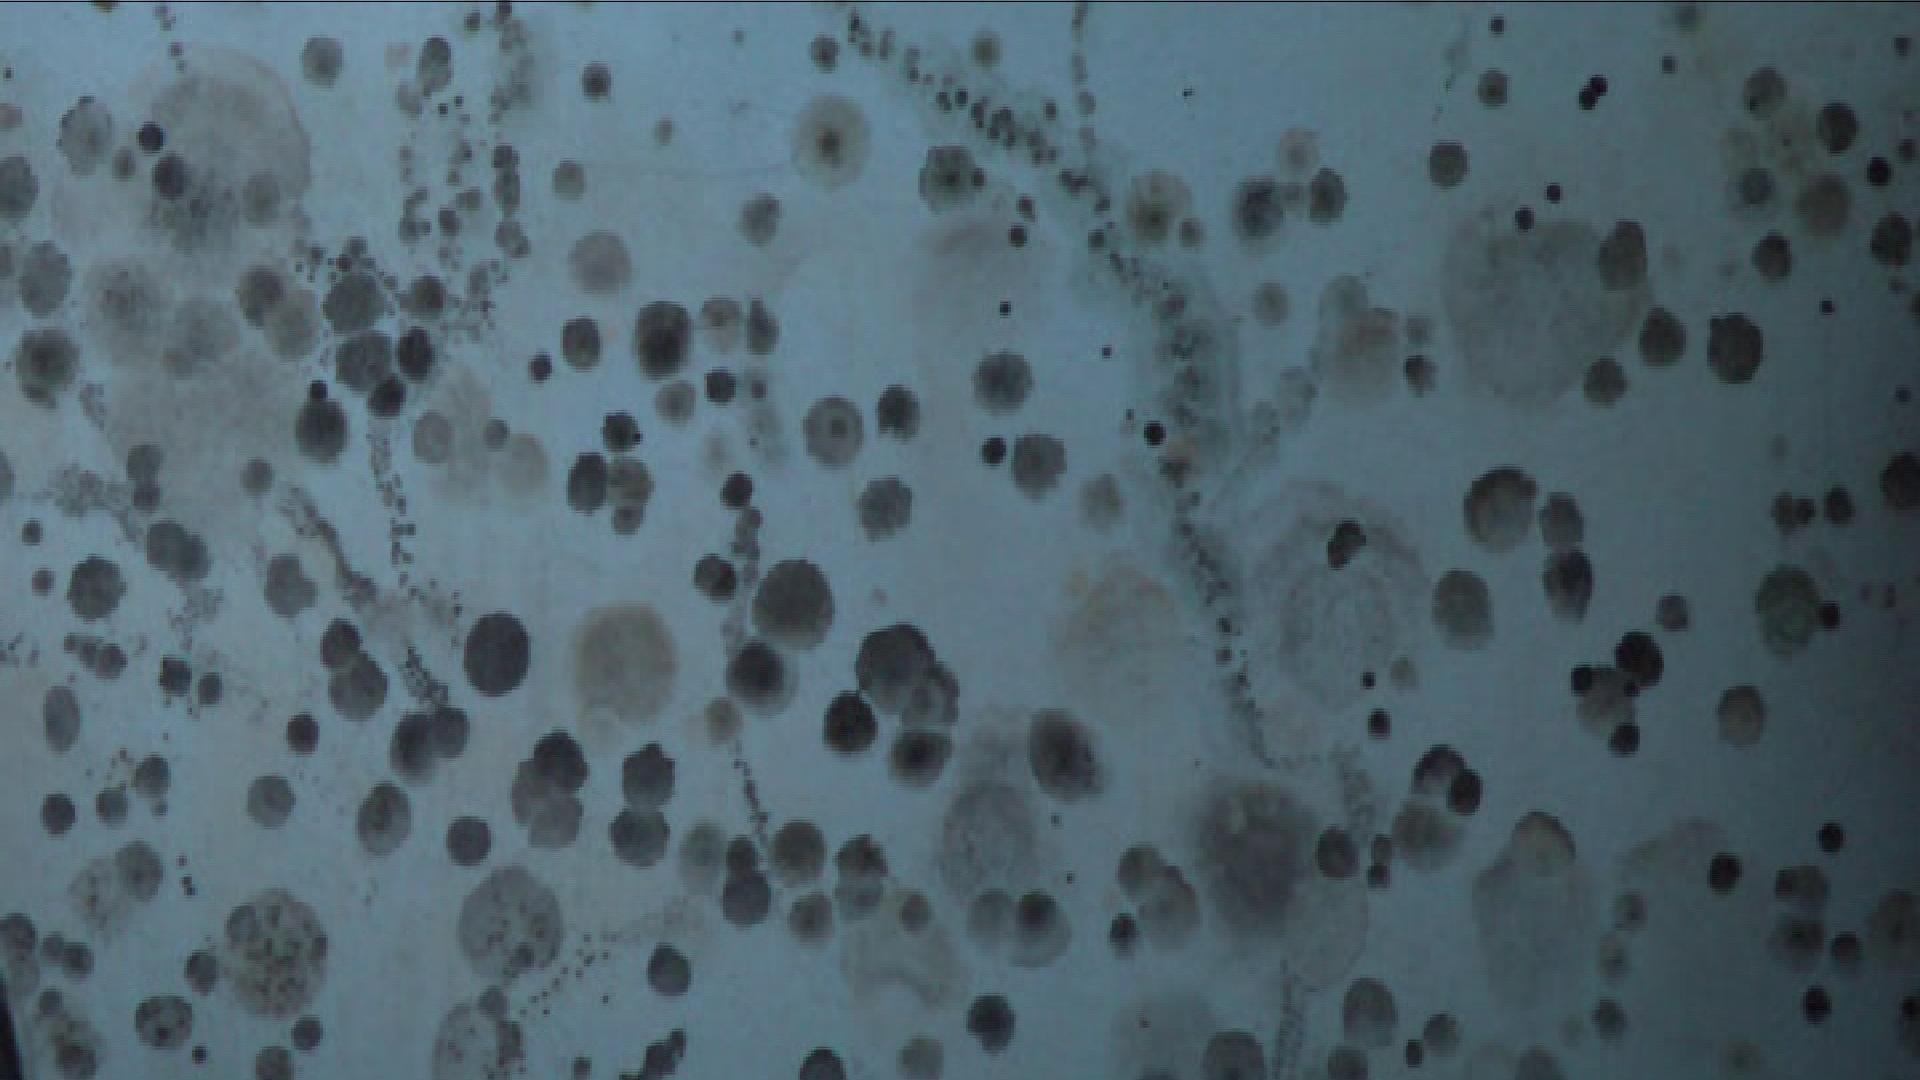 Figure 4:  Mold caused by too much water vapor trapped within a building.  Credit:  http://media.kmvt.com/images/MOLD1.jpg_BIM.jpg 